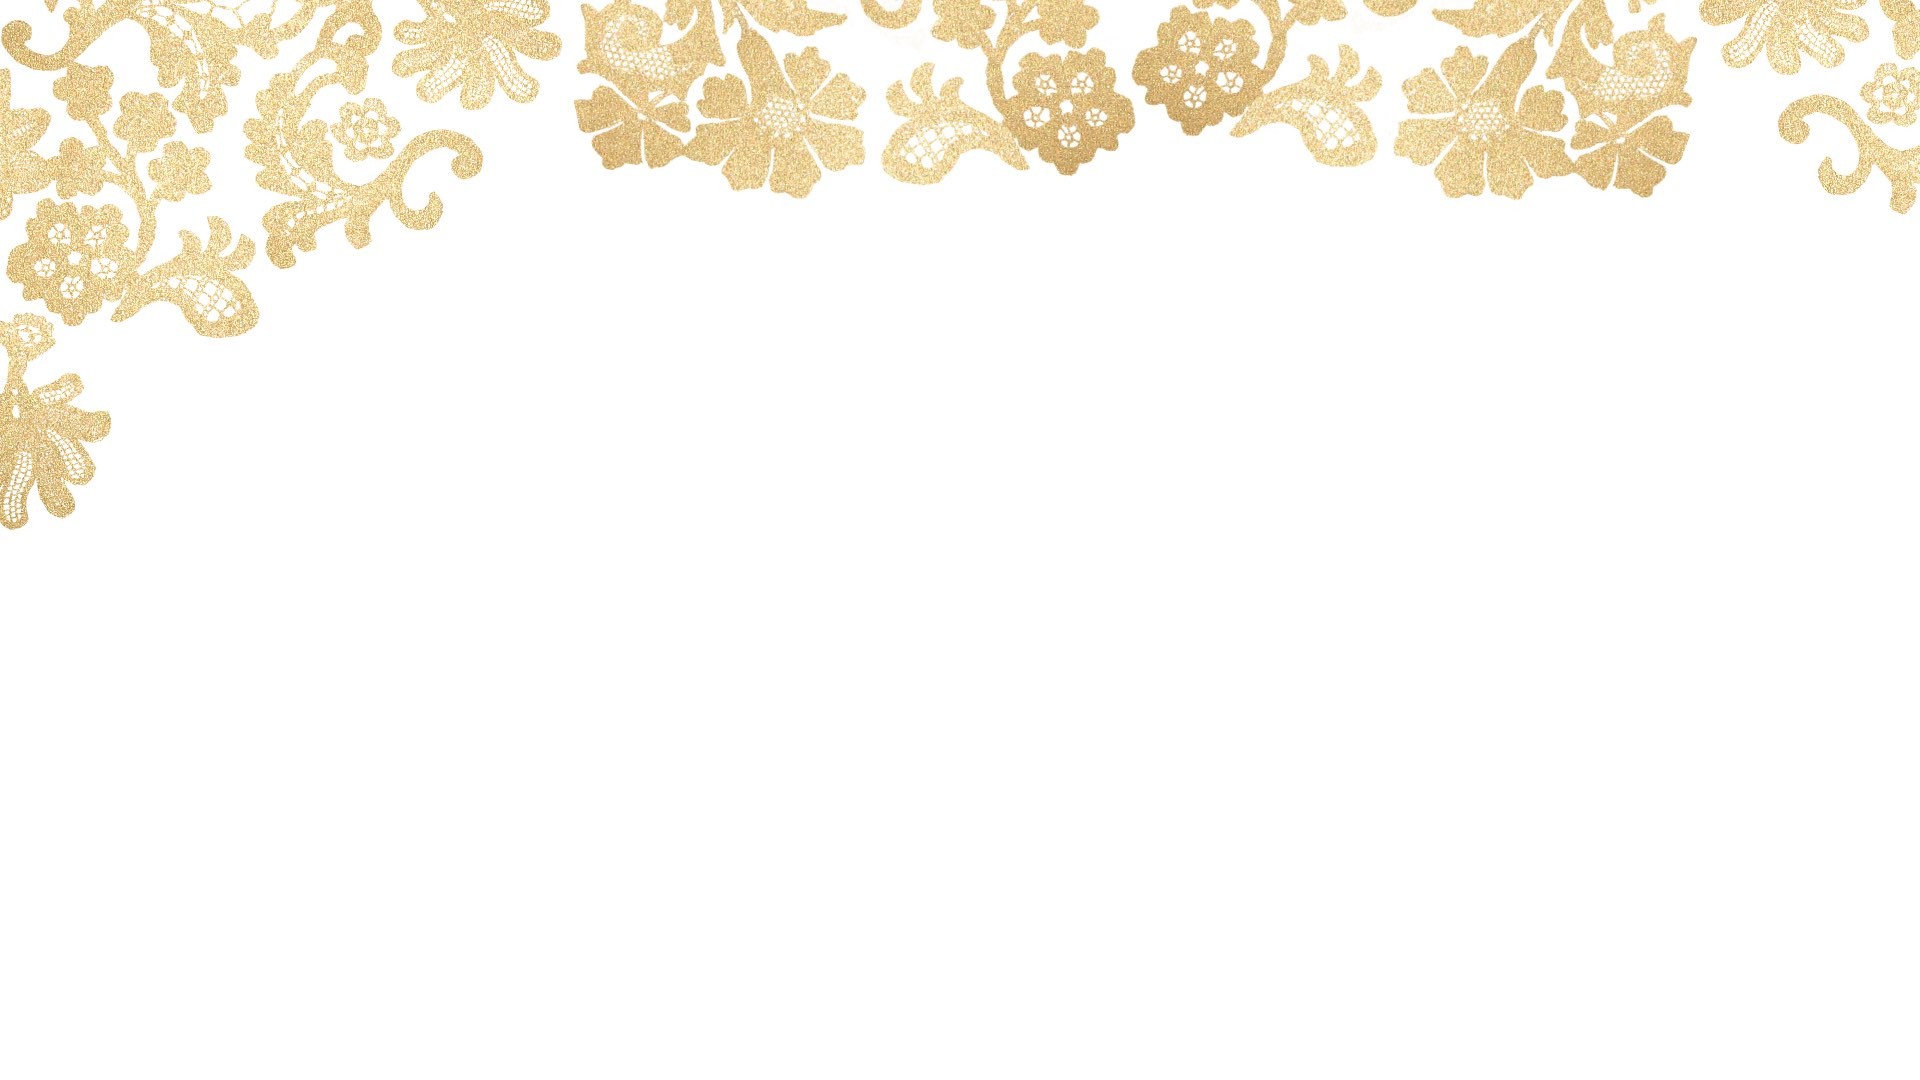 Website Background Or Wrapping Paper Or Wedding Invitation 1920x1080